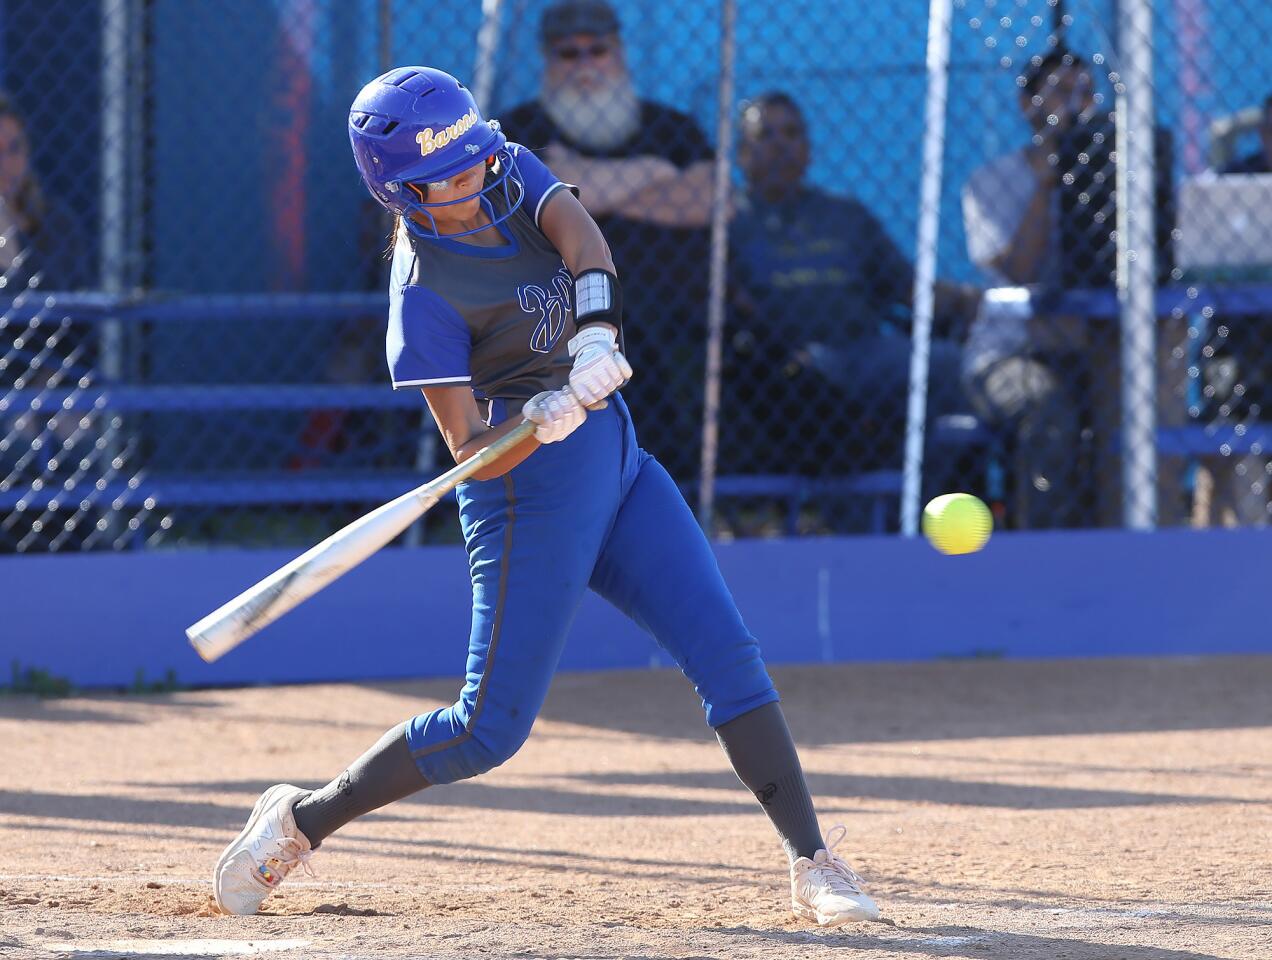 Fountain Valley's Samara Ortega drives the ball for a hit in a Wave League game against Newport Harbor on Wednesday.